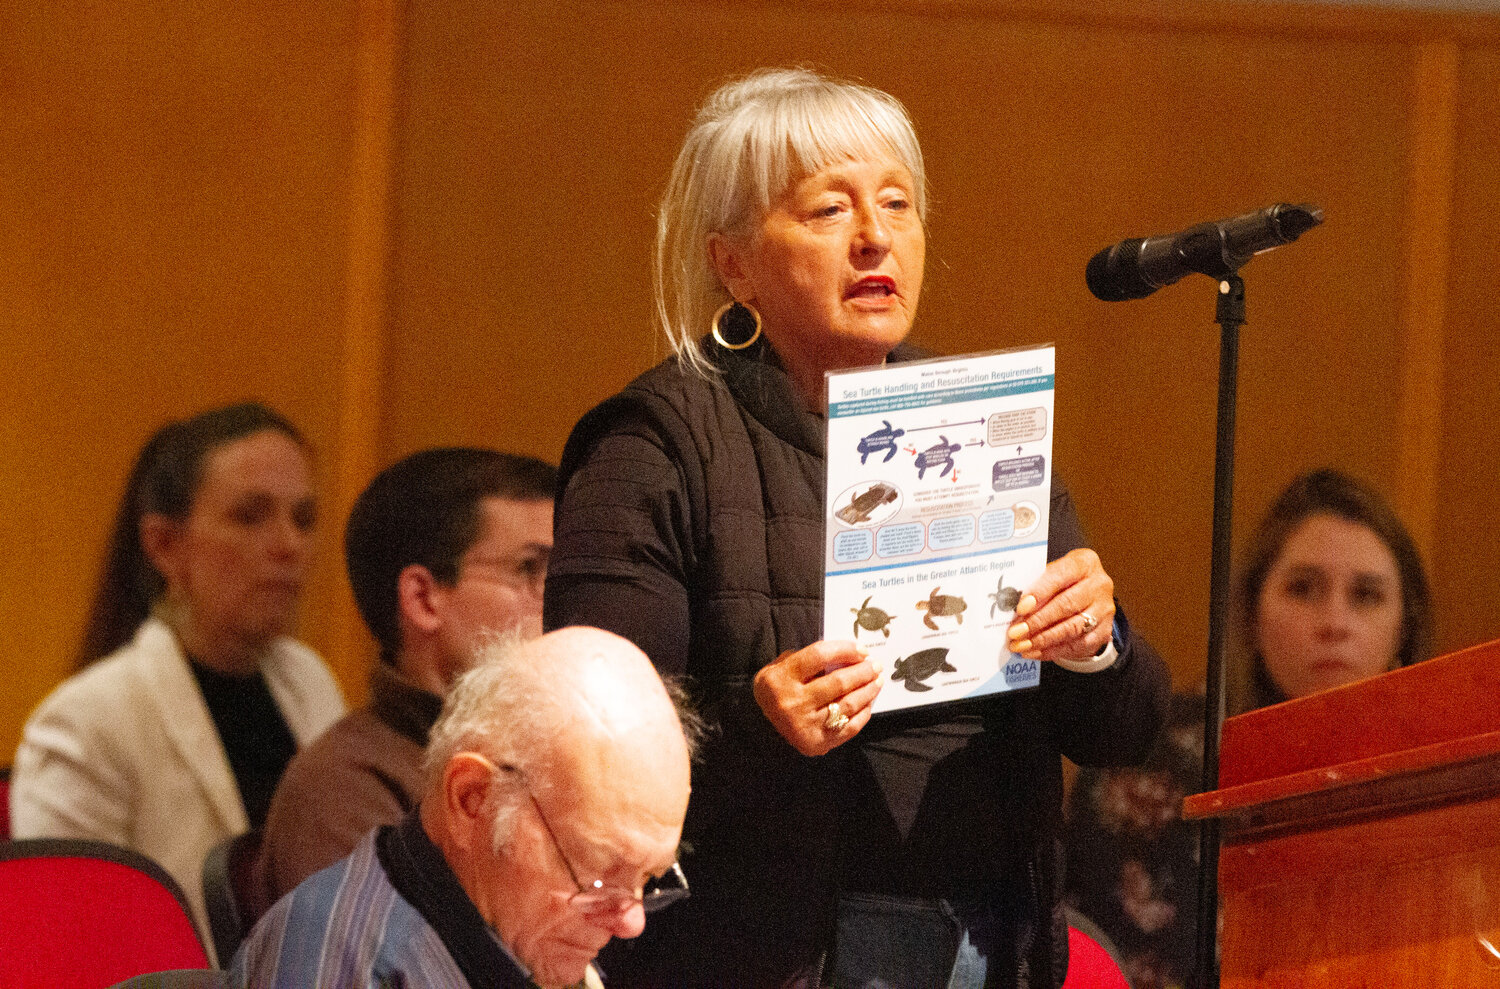 Local resident Carol Mello said the project will greatly harm the local commercial fishing industry.